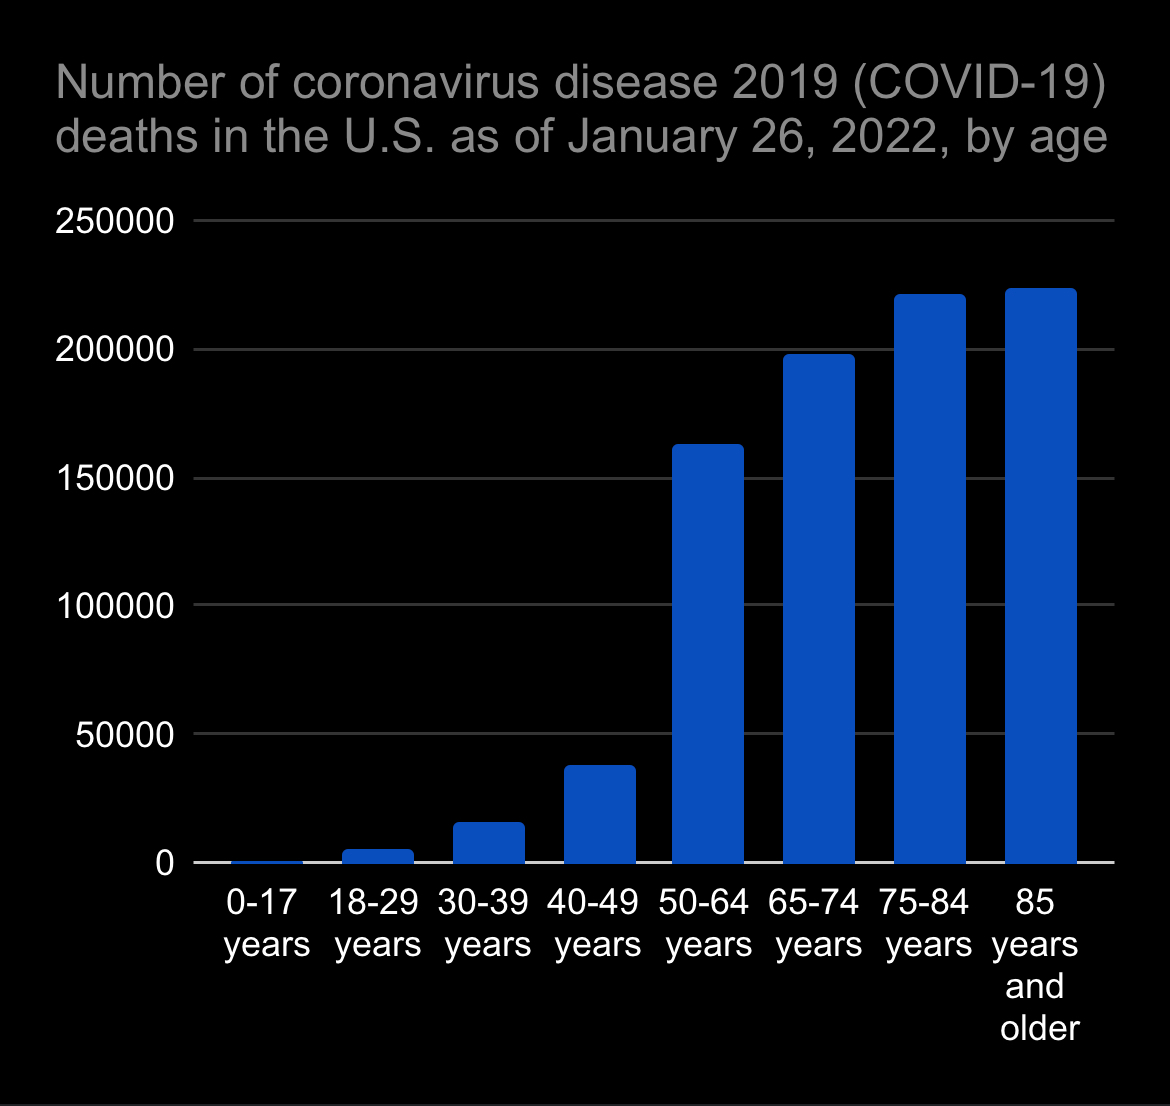 Number of coronavirus disease 2019 (COVID-19) deaths in the U.S. as of January 26, 2022, by age